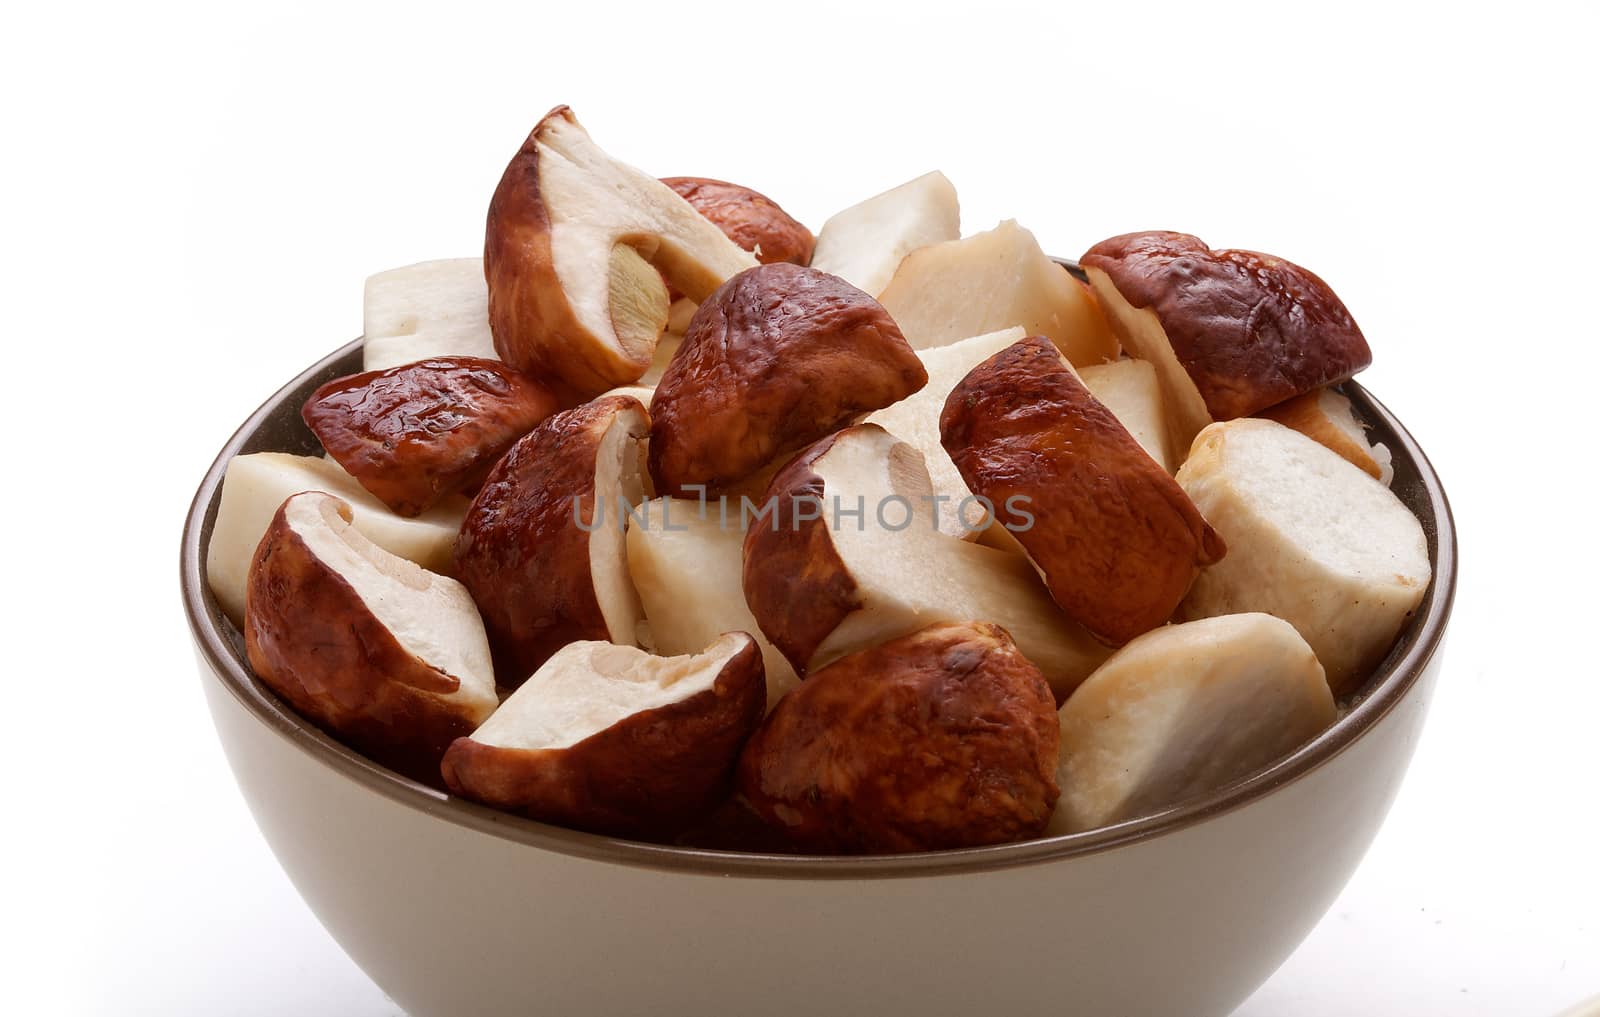 Sliced white mushrooms in the bowl by Angorius